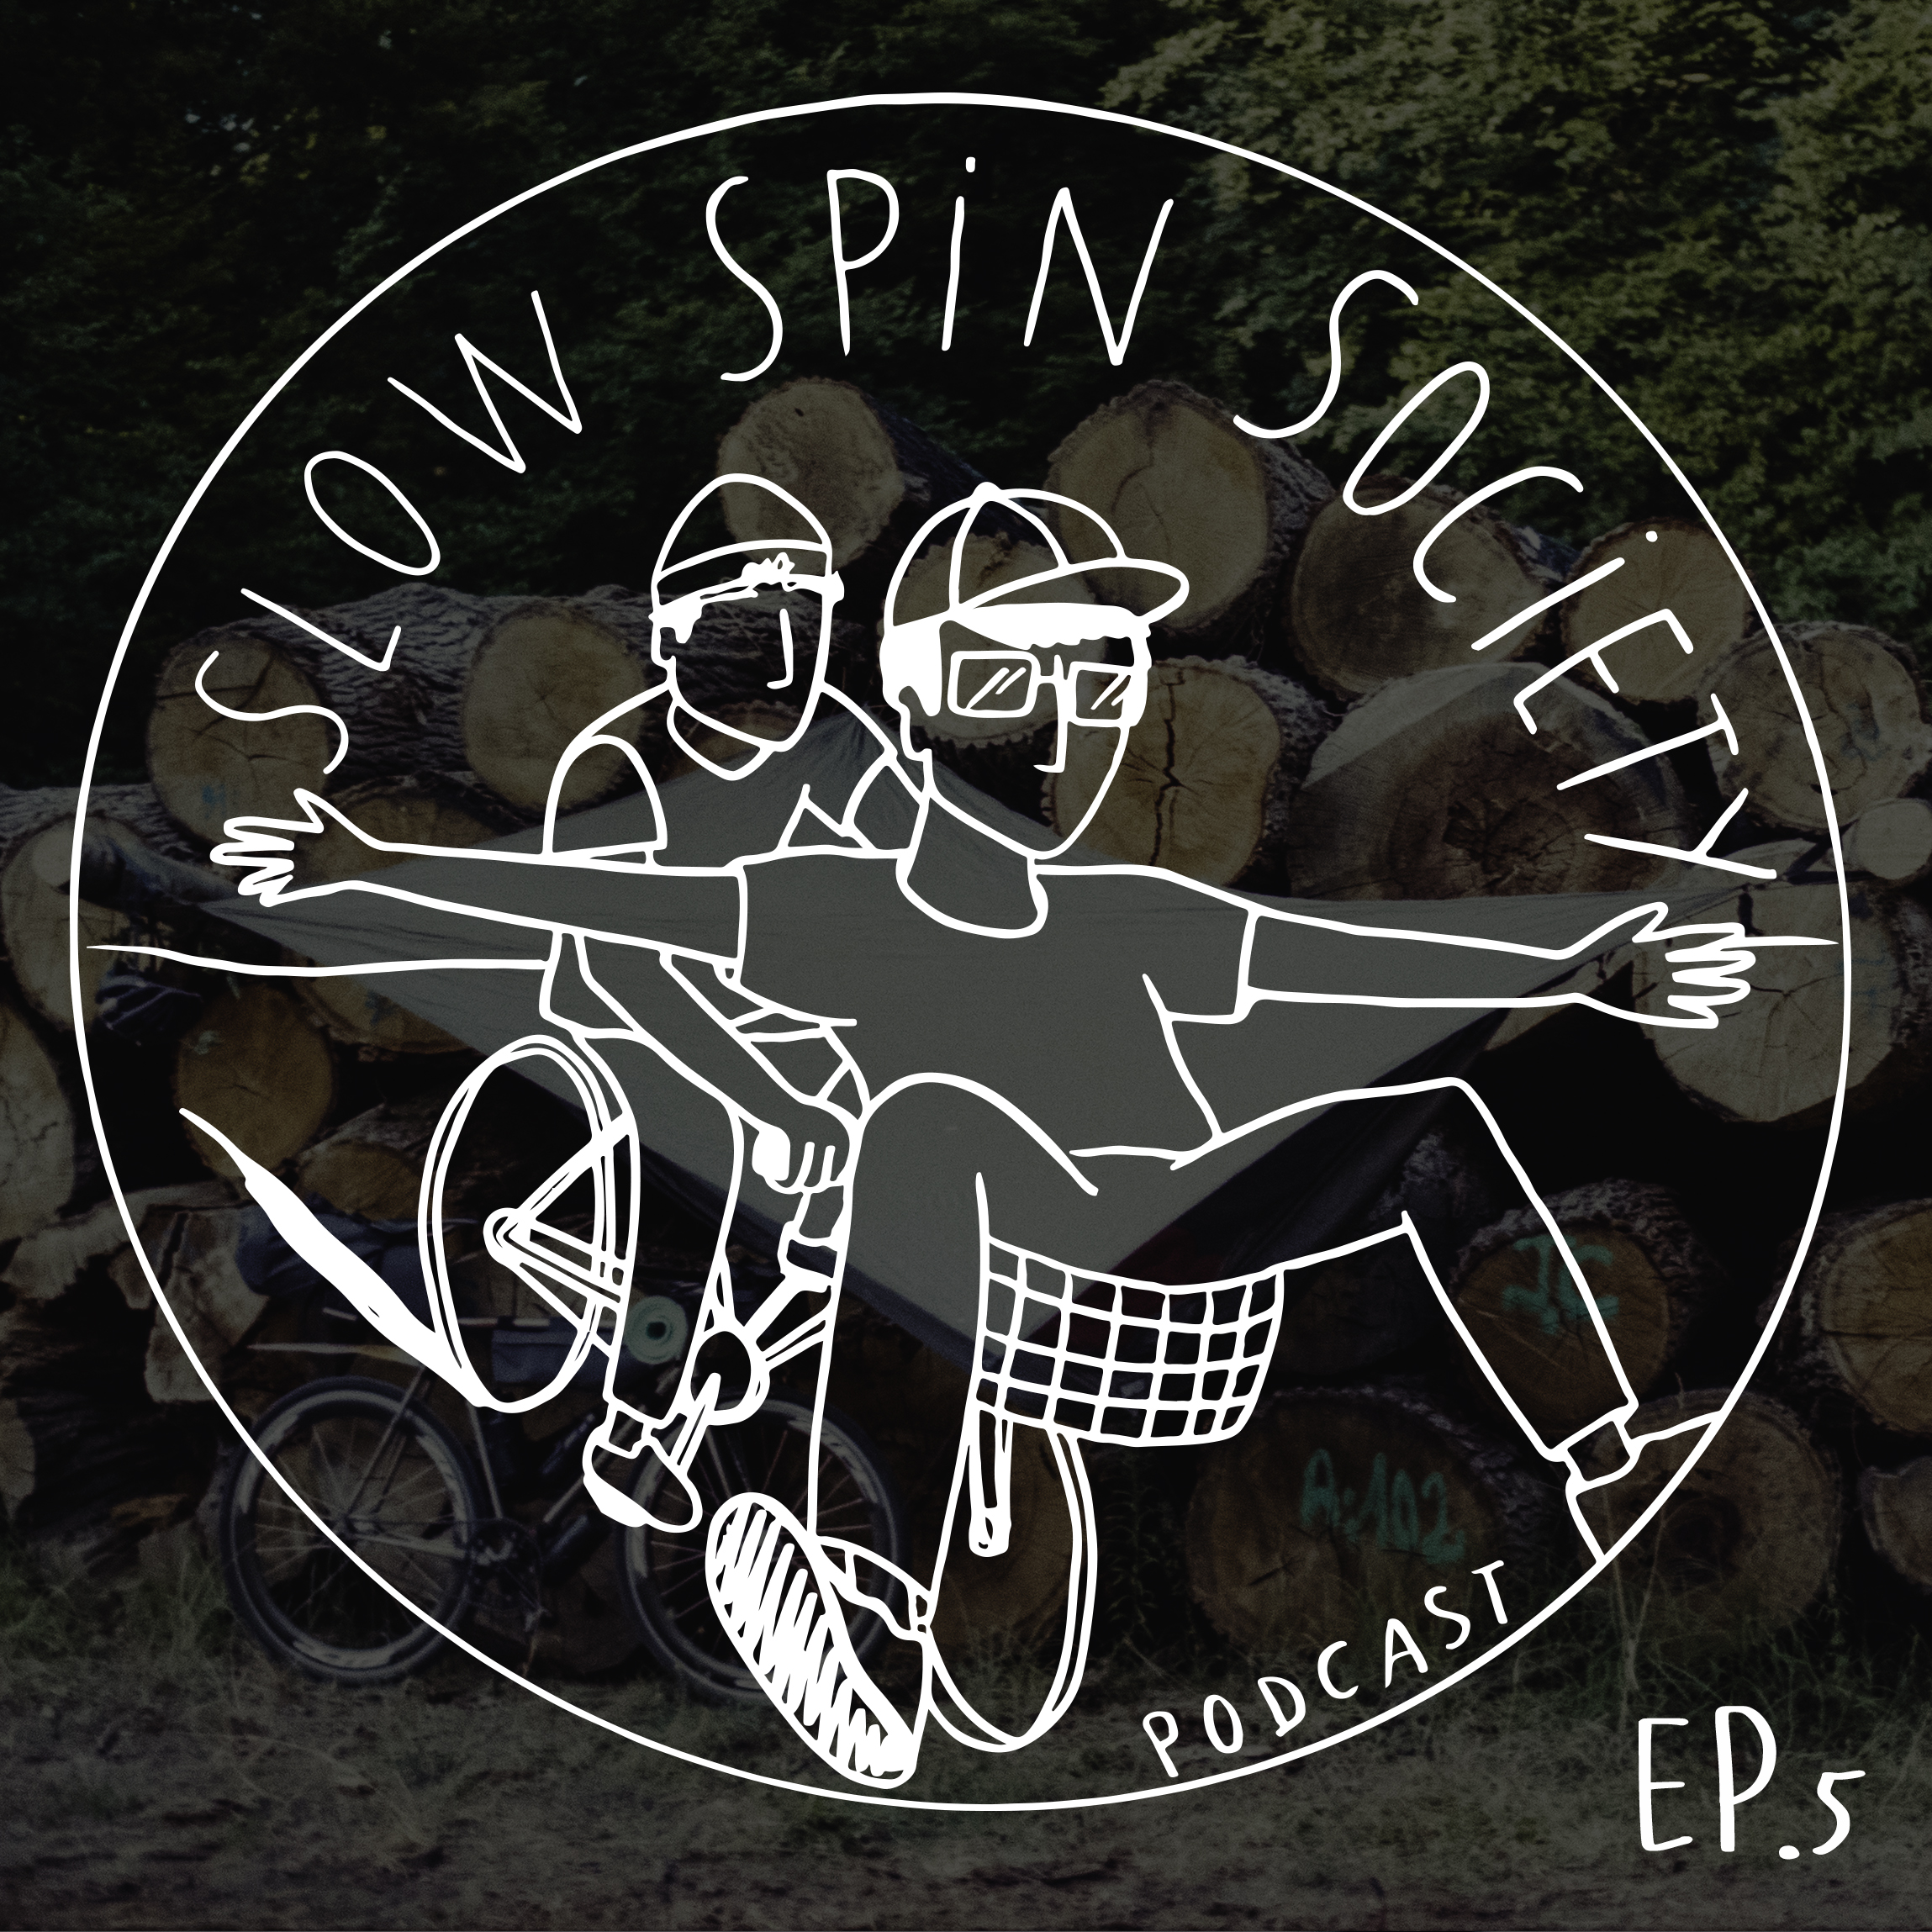 The Slow Spin Society Podcast Ep.5 : What is Trackpacking?